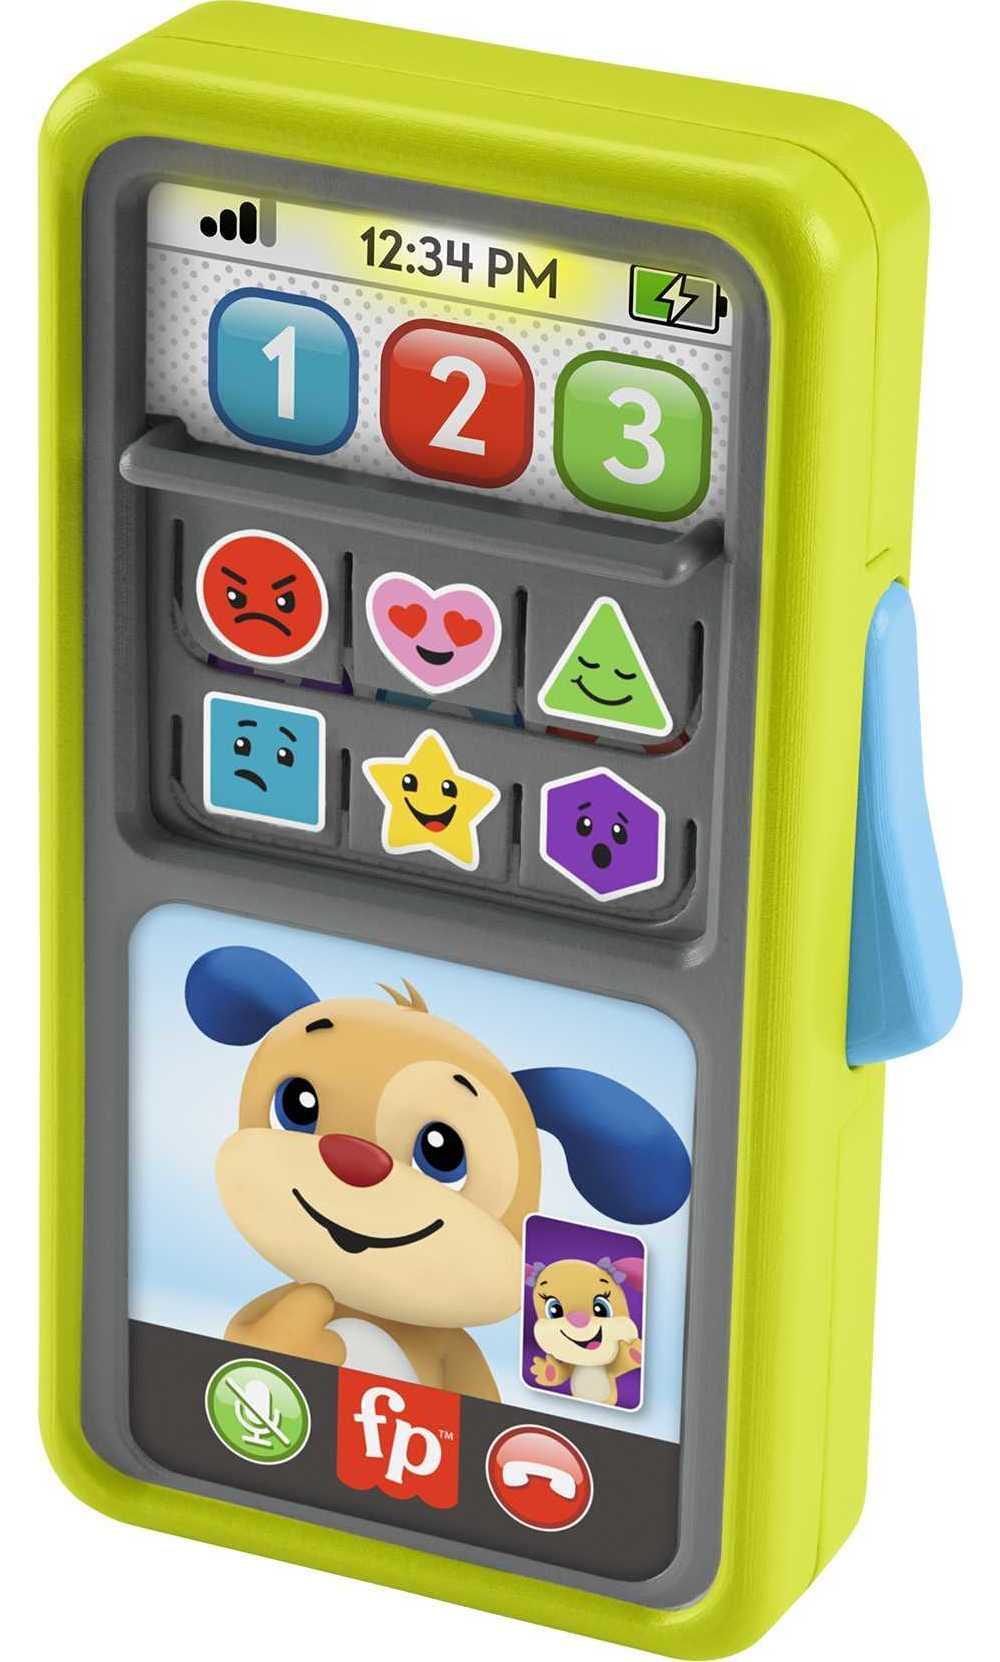 Fisher-Price Laugh & Learn 2-in-1 Slide to Learn Smartphone Musical Toy for Baby & Toddler